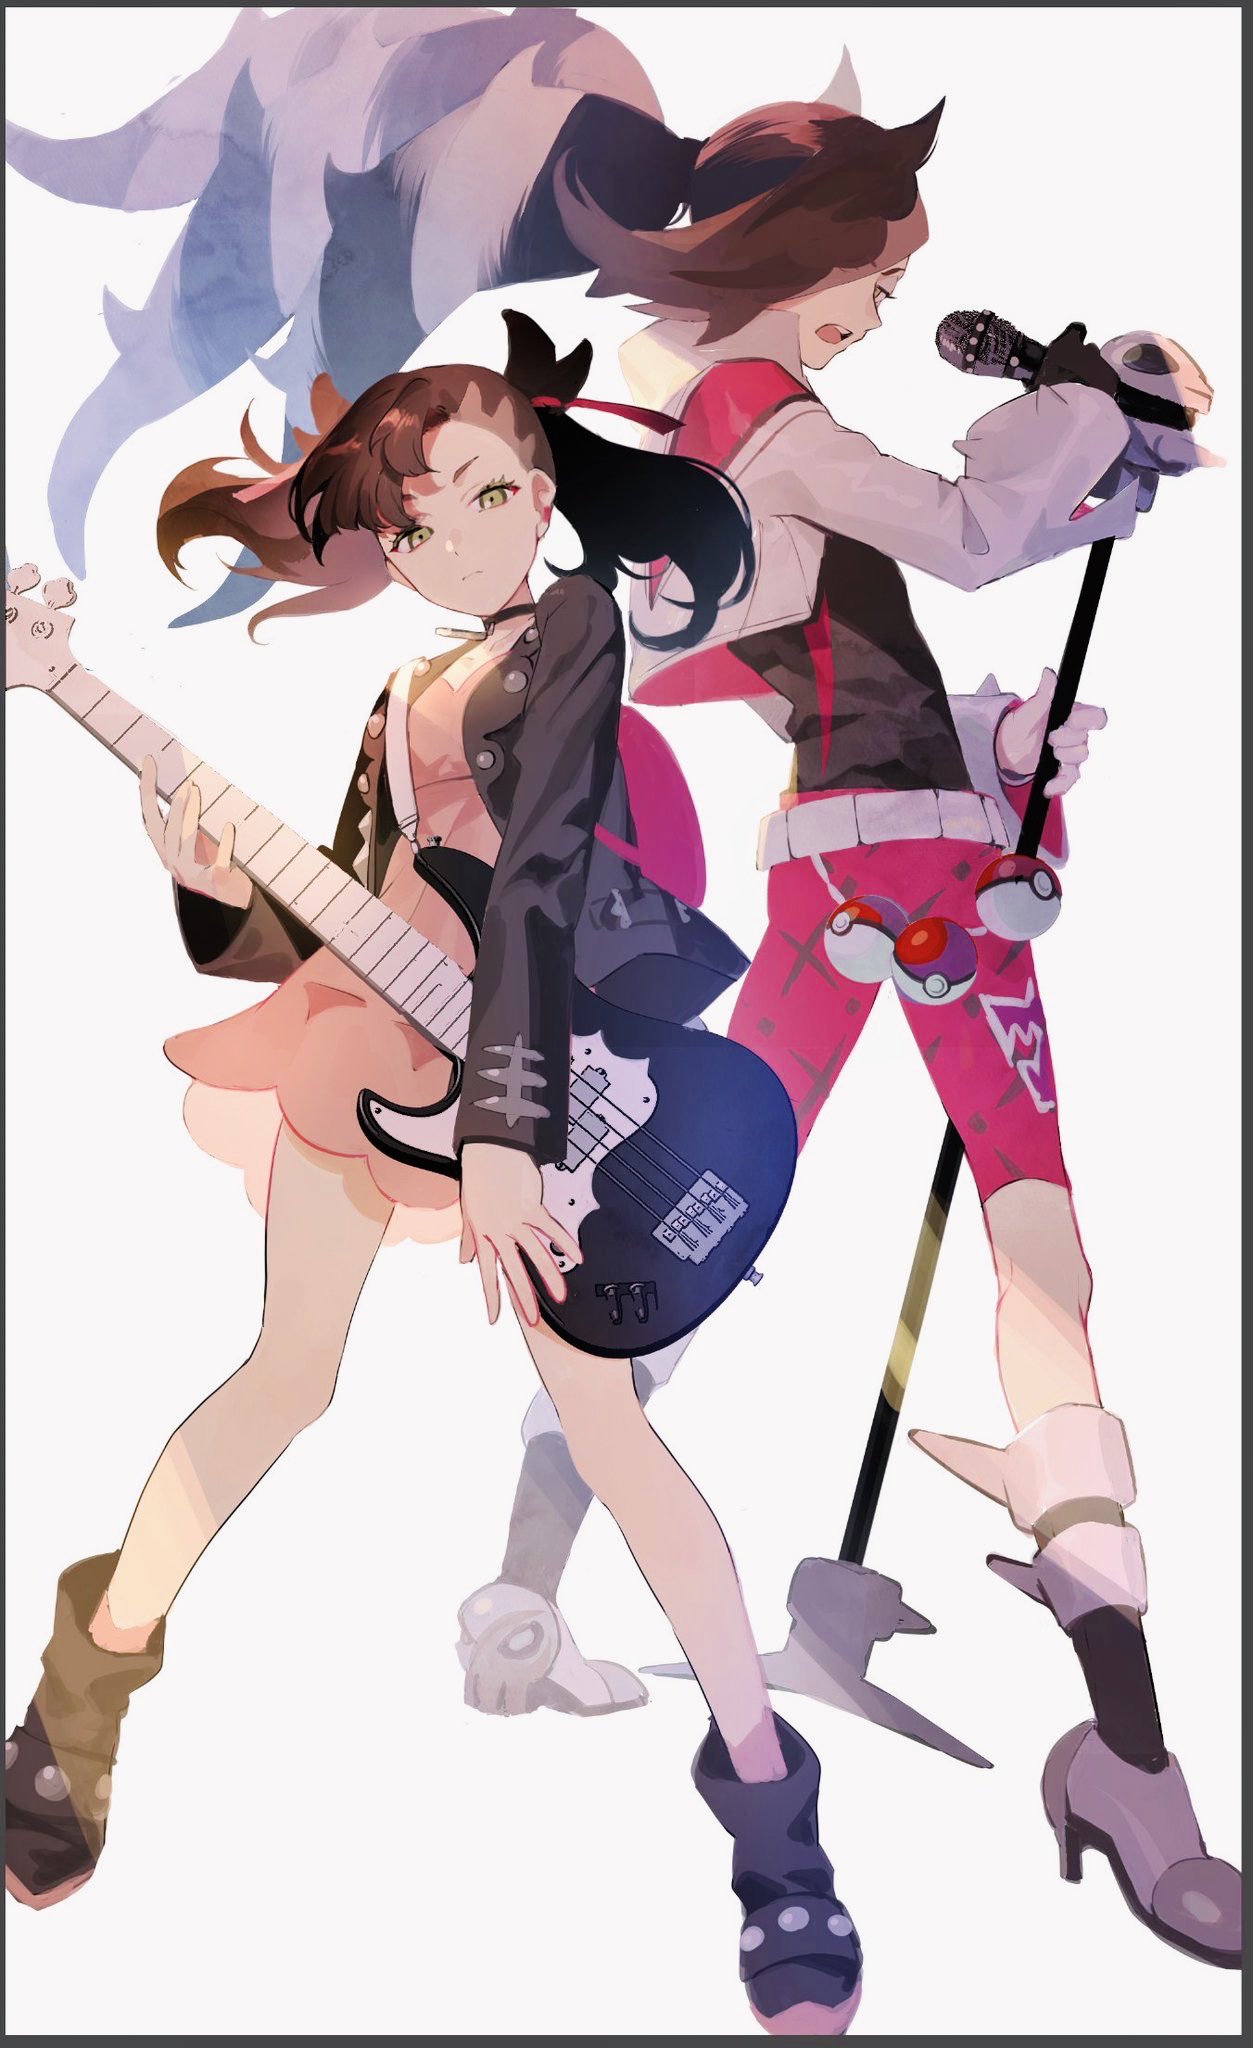 1boy 1girl backpack bag bass_guitar black_border black_hair border brother_and_sister choker dress high_heels highres instrument mary_(pokemon) microphone microphone_stand multicolored_hair nezu_(pokemon) poke_ball poke_ball_(generic) pokemon pokemon_(game) pokemon_swsh ponytail shorts siblings twintails two-tone_hair white_hair yubari